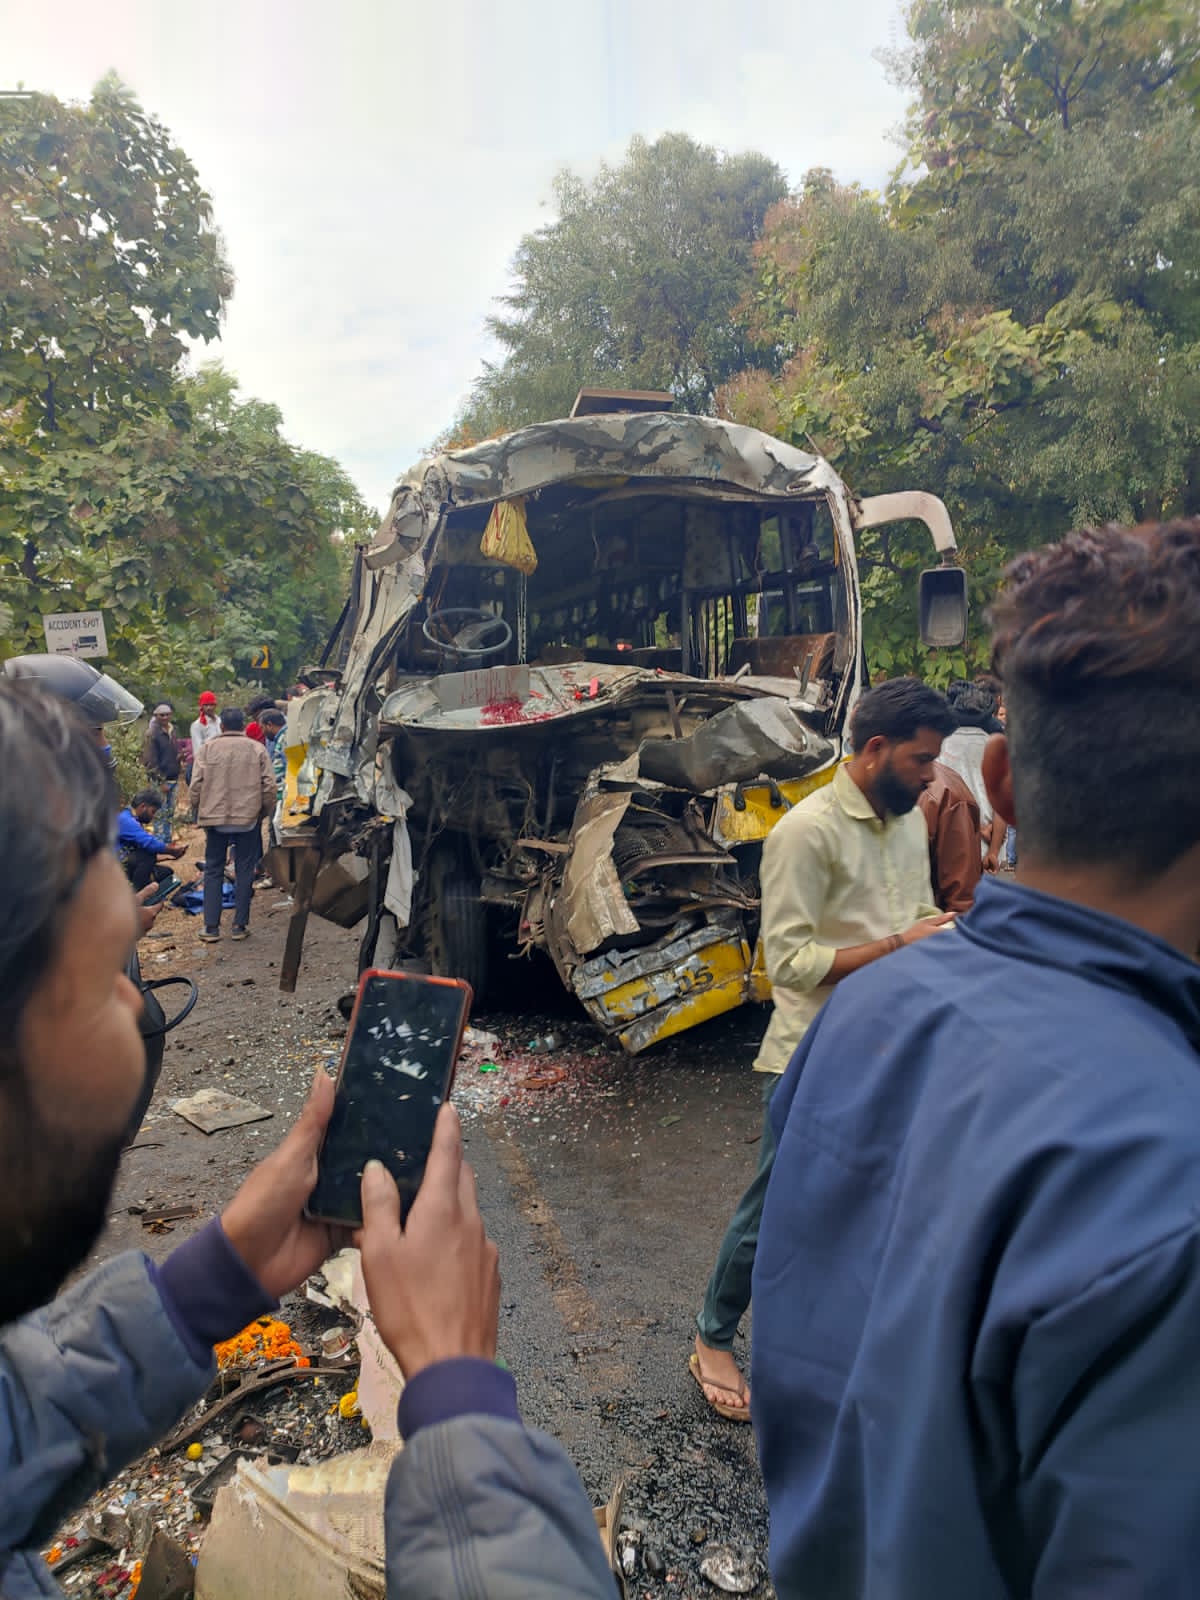 MP Road Accident